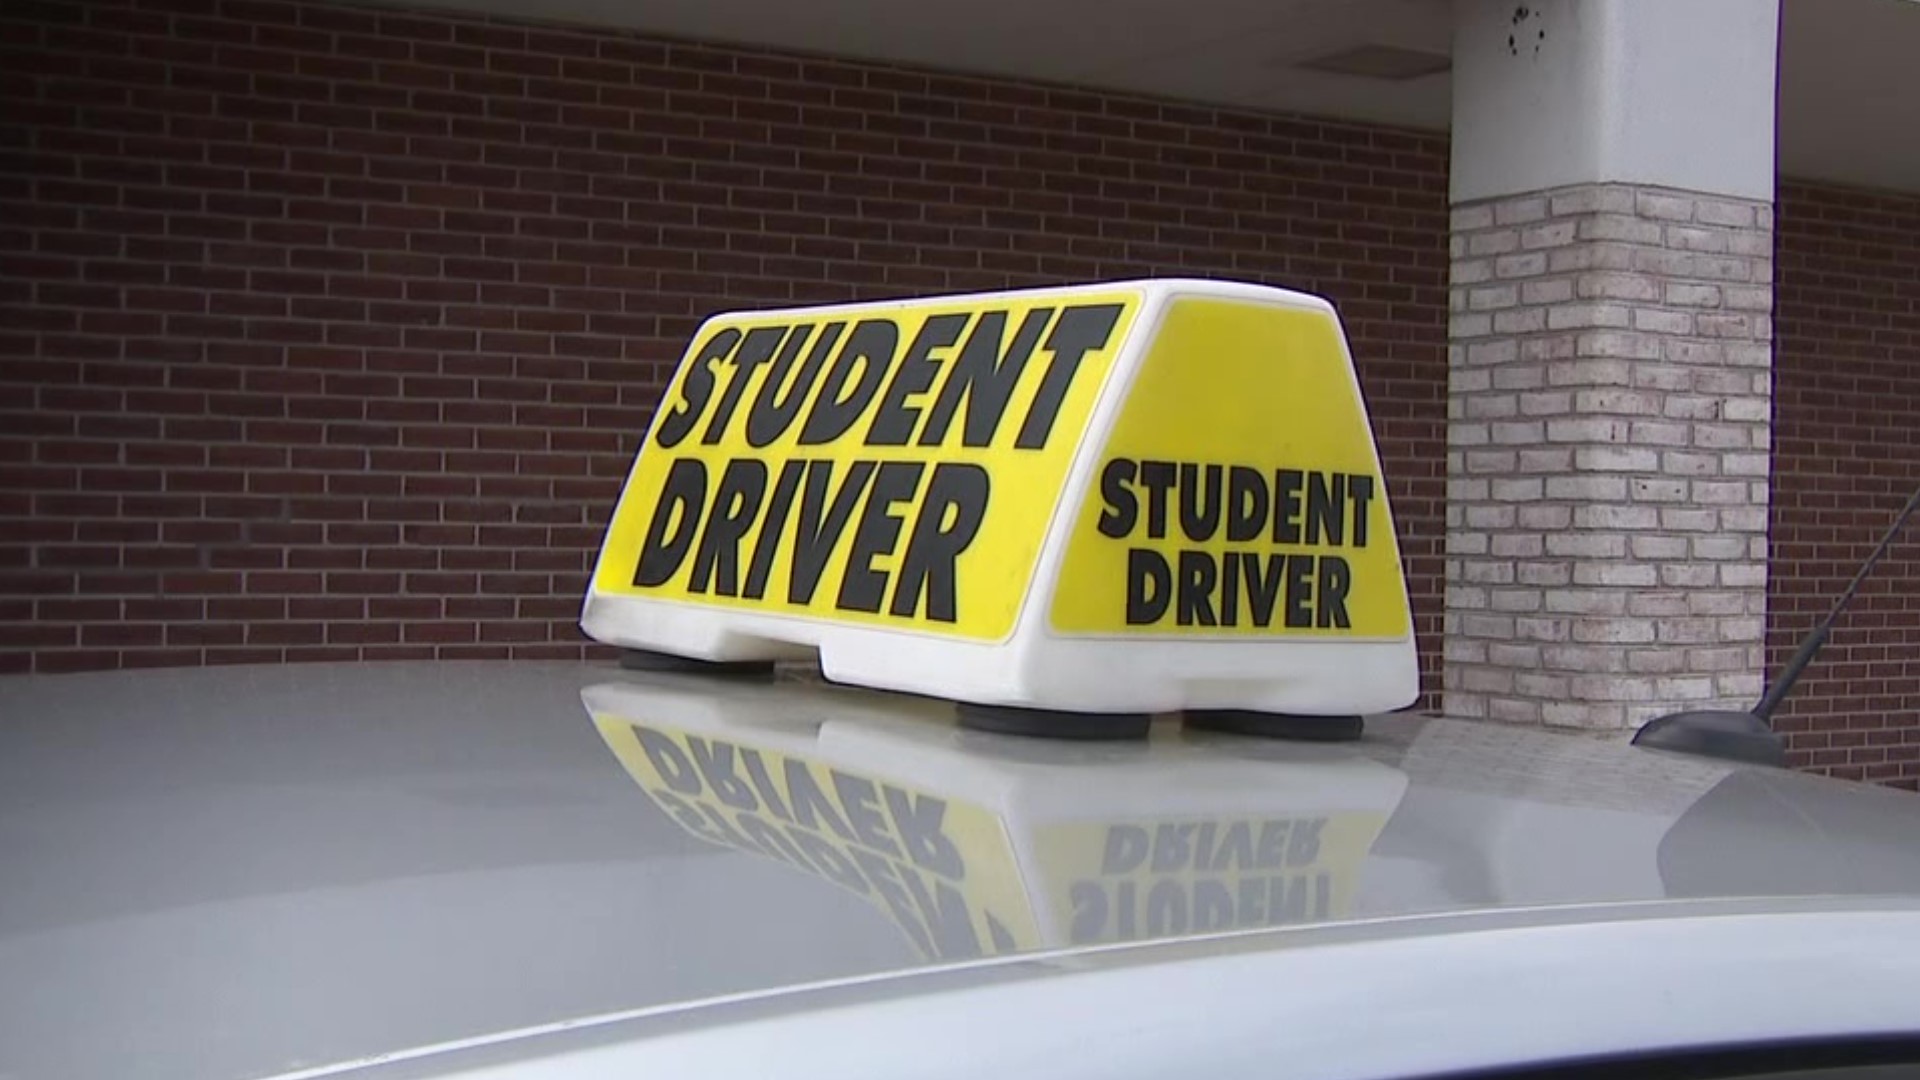 When you turn 16, you can get behind the wheel for the first time. But two Pennsylvania lawmakers hope to lower that age to 15.